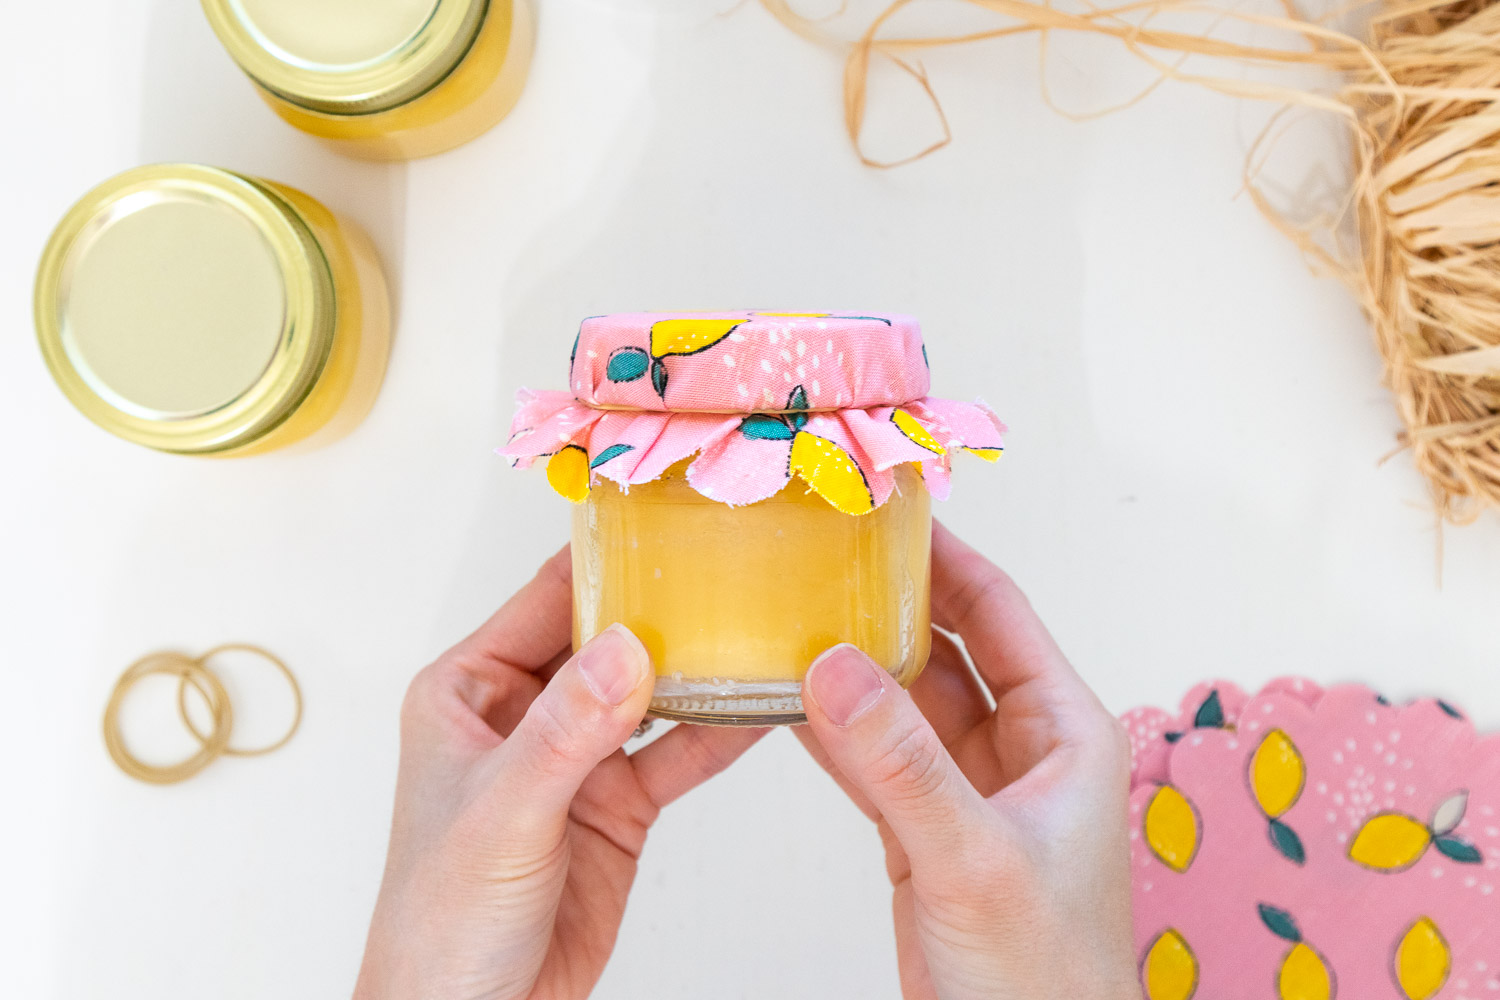 Placing a rubber band to secure the scalloped fabric circle to the neck of the lemon curd jar.